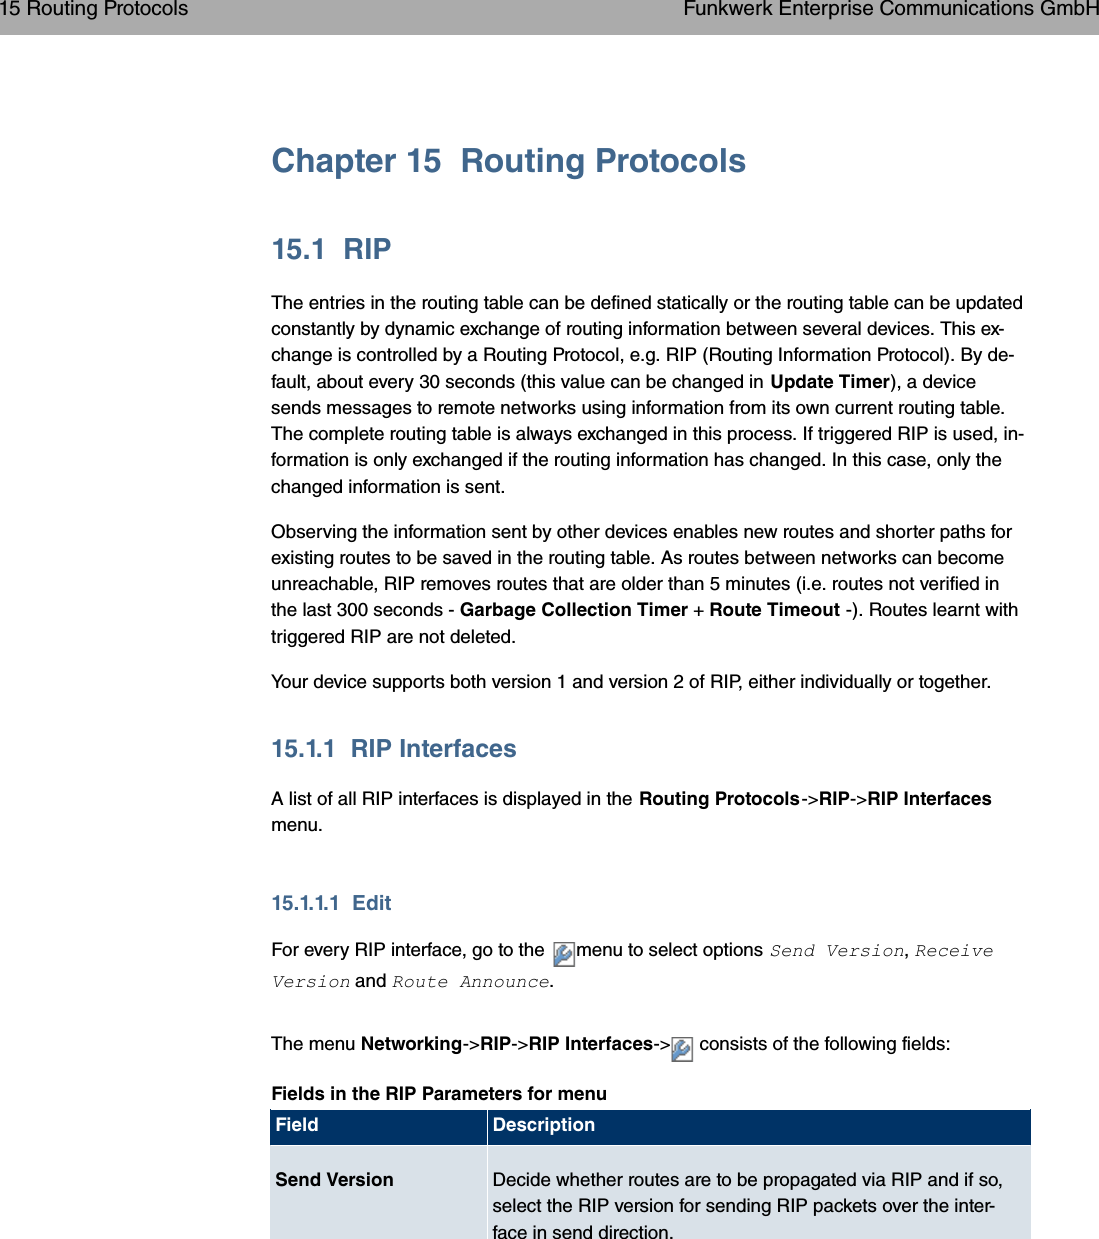 Chapter 15 Routing Protocols15.1 RIPThe entries in the routing table can be defined statically or the routing table can be updatedconstantly by dynamic exchange of routing information between several devices. This ex-change is controlled by a Routing Protocol, e.g. RIP (Routing Information Protocol). By de-fault, about every 30 seconds (this value can be changed in Update Timer), a devicesends messages to remote networks using information from its own current routing table.The complete routing table is always exchanged in this process. If triggered RIP is used, in-formation is only exchanged if the routing information has changed. In this case, only thechanged information is sent.Observing the information sent by other devices enables new routes and shorter paths forexisting routes to be saved in the routing table. As routes between networks can becomeunreachable, RIP removes routes that are older than 5 minutes (i.e. routes not verified inthe last 300 seconds - Garbage Collection Timer +Route Timeout -). Routes learnt withtriggered RIP are not deleted.Your device supports both version 1 and version 2 of RIP, either individually or together.15.1.1 RIP InterfacesA list of all RIP interfaces is displayed in the Routing Protocols-&gt;RIP-&gt;RIP Interfacesmenu.15.1.1.1 EditFor every RIP interface, go to the menu to select options  3 ,7/3  and 7&quot; .The menu Networking-&gt; RIP-&gt;RIP Interfaces-&gt; consists of the following fields:Fields in the RIP Parameters for menuField DescriptionSend Version Decide whether routes are to be propagated via RIP and if so,select the RIP version for sending RIP packets over the inter-face in send direction.15 Routing Protocols Funkwerk Enterprise Communications GmbH198 bintec WLAN and Industrial WLAN